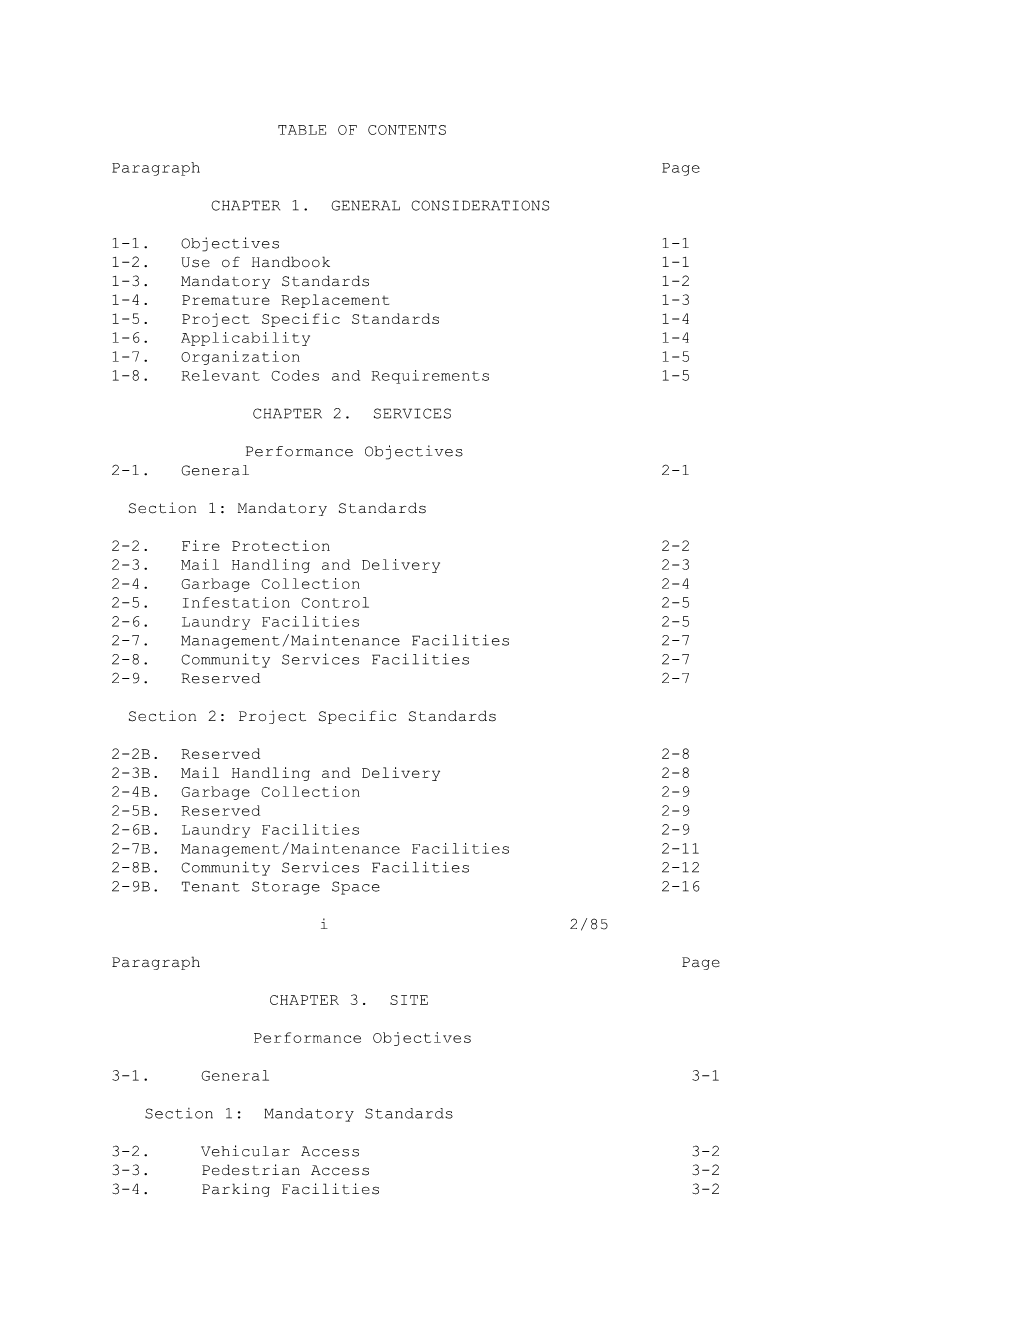 Table of Contents s563